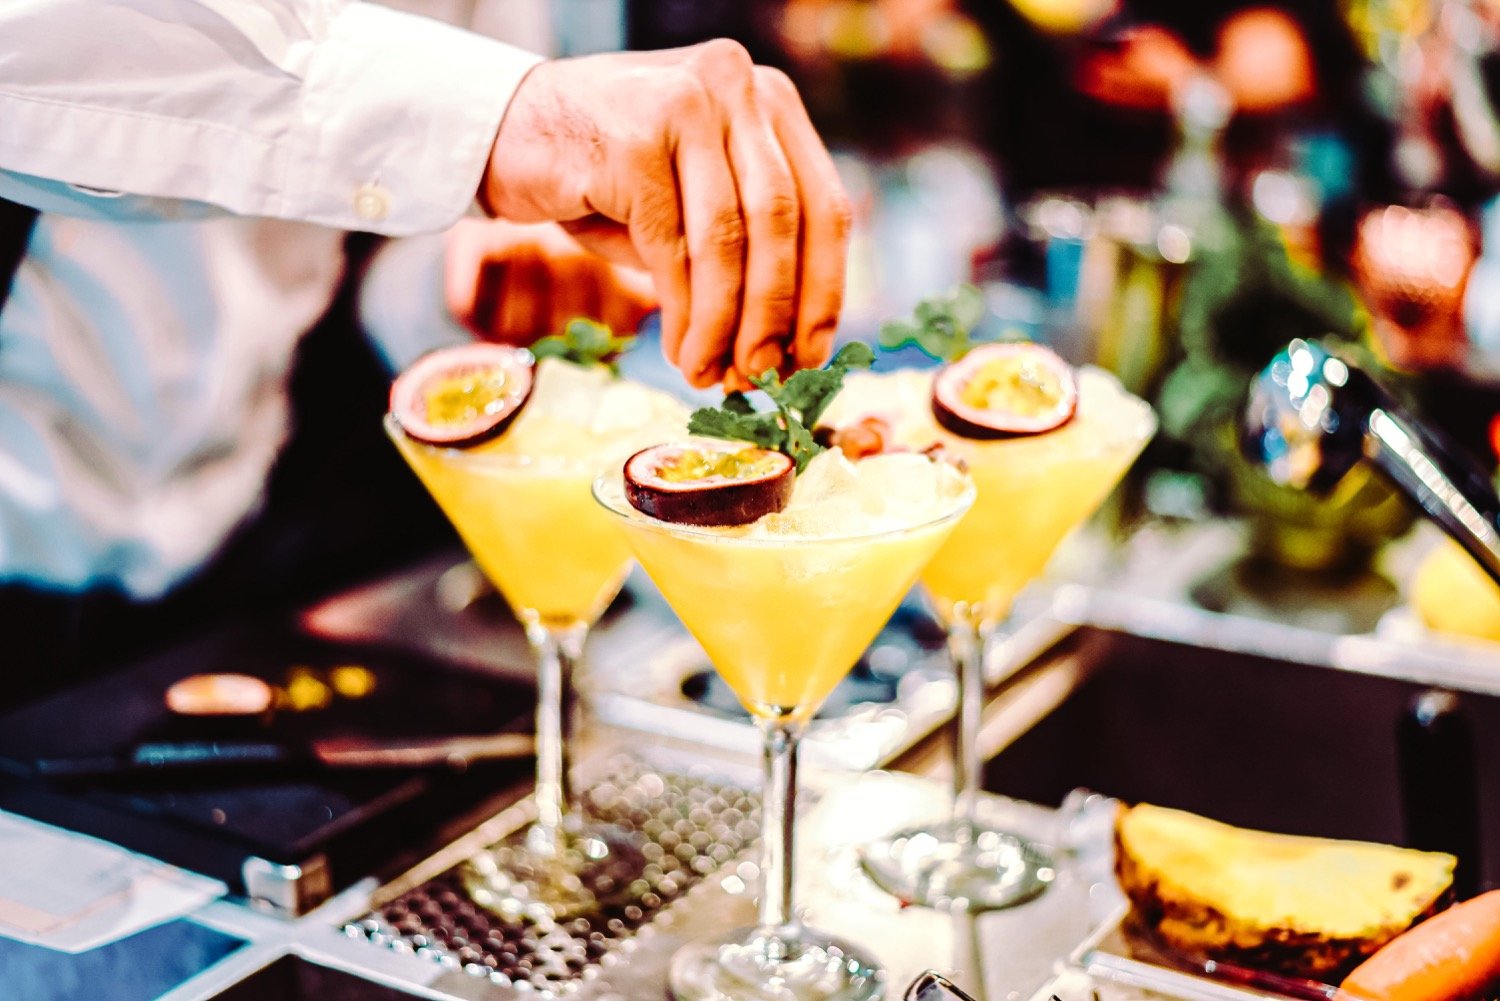 Why Restaurant Operators Should Be Paying Attention to Their Non-Alcoholic Drink Options